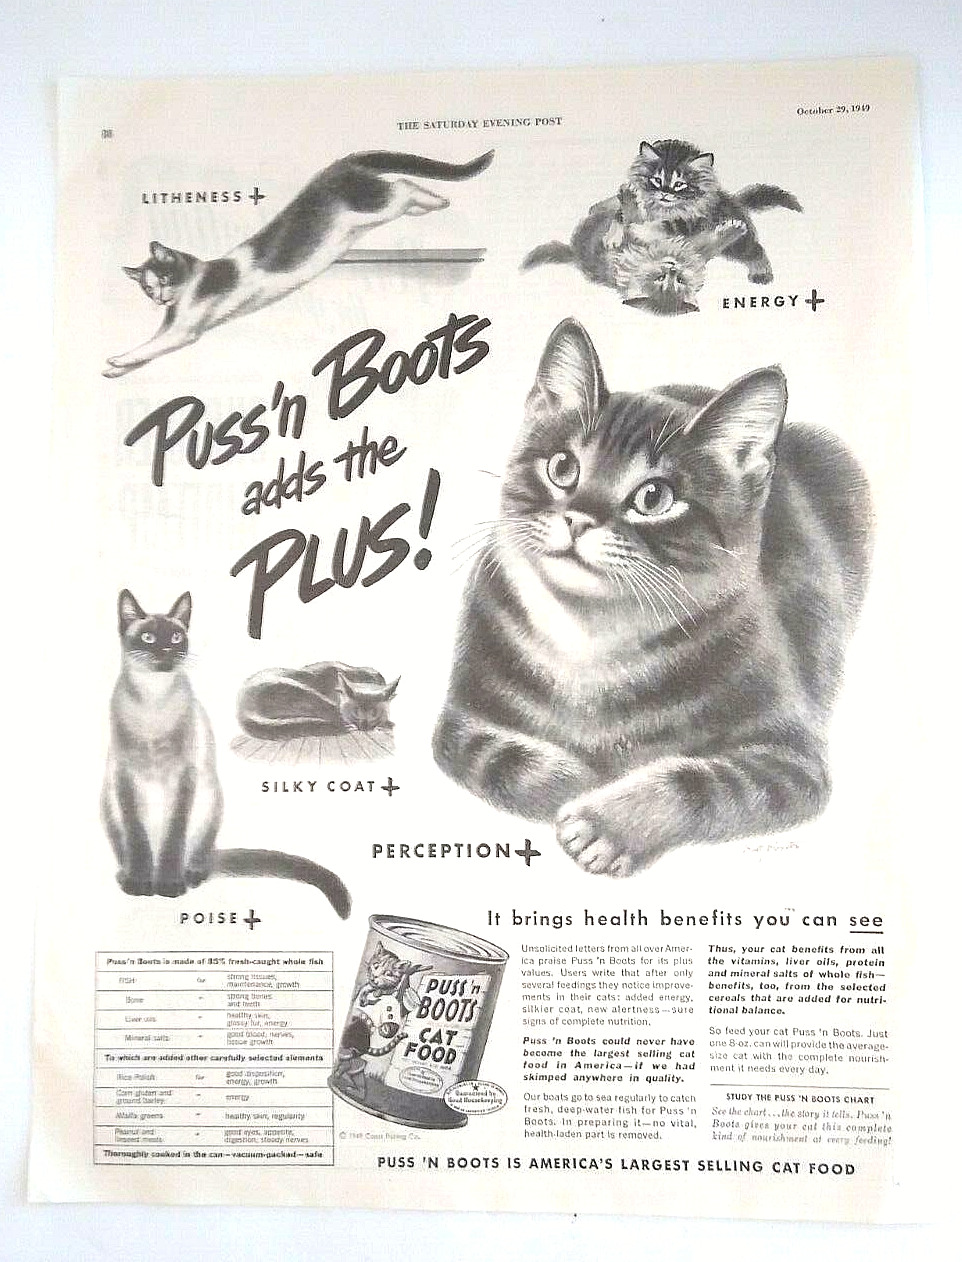 Puss'n Boots Adds The Plus! Vintage Print Ad 1949